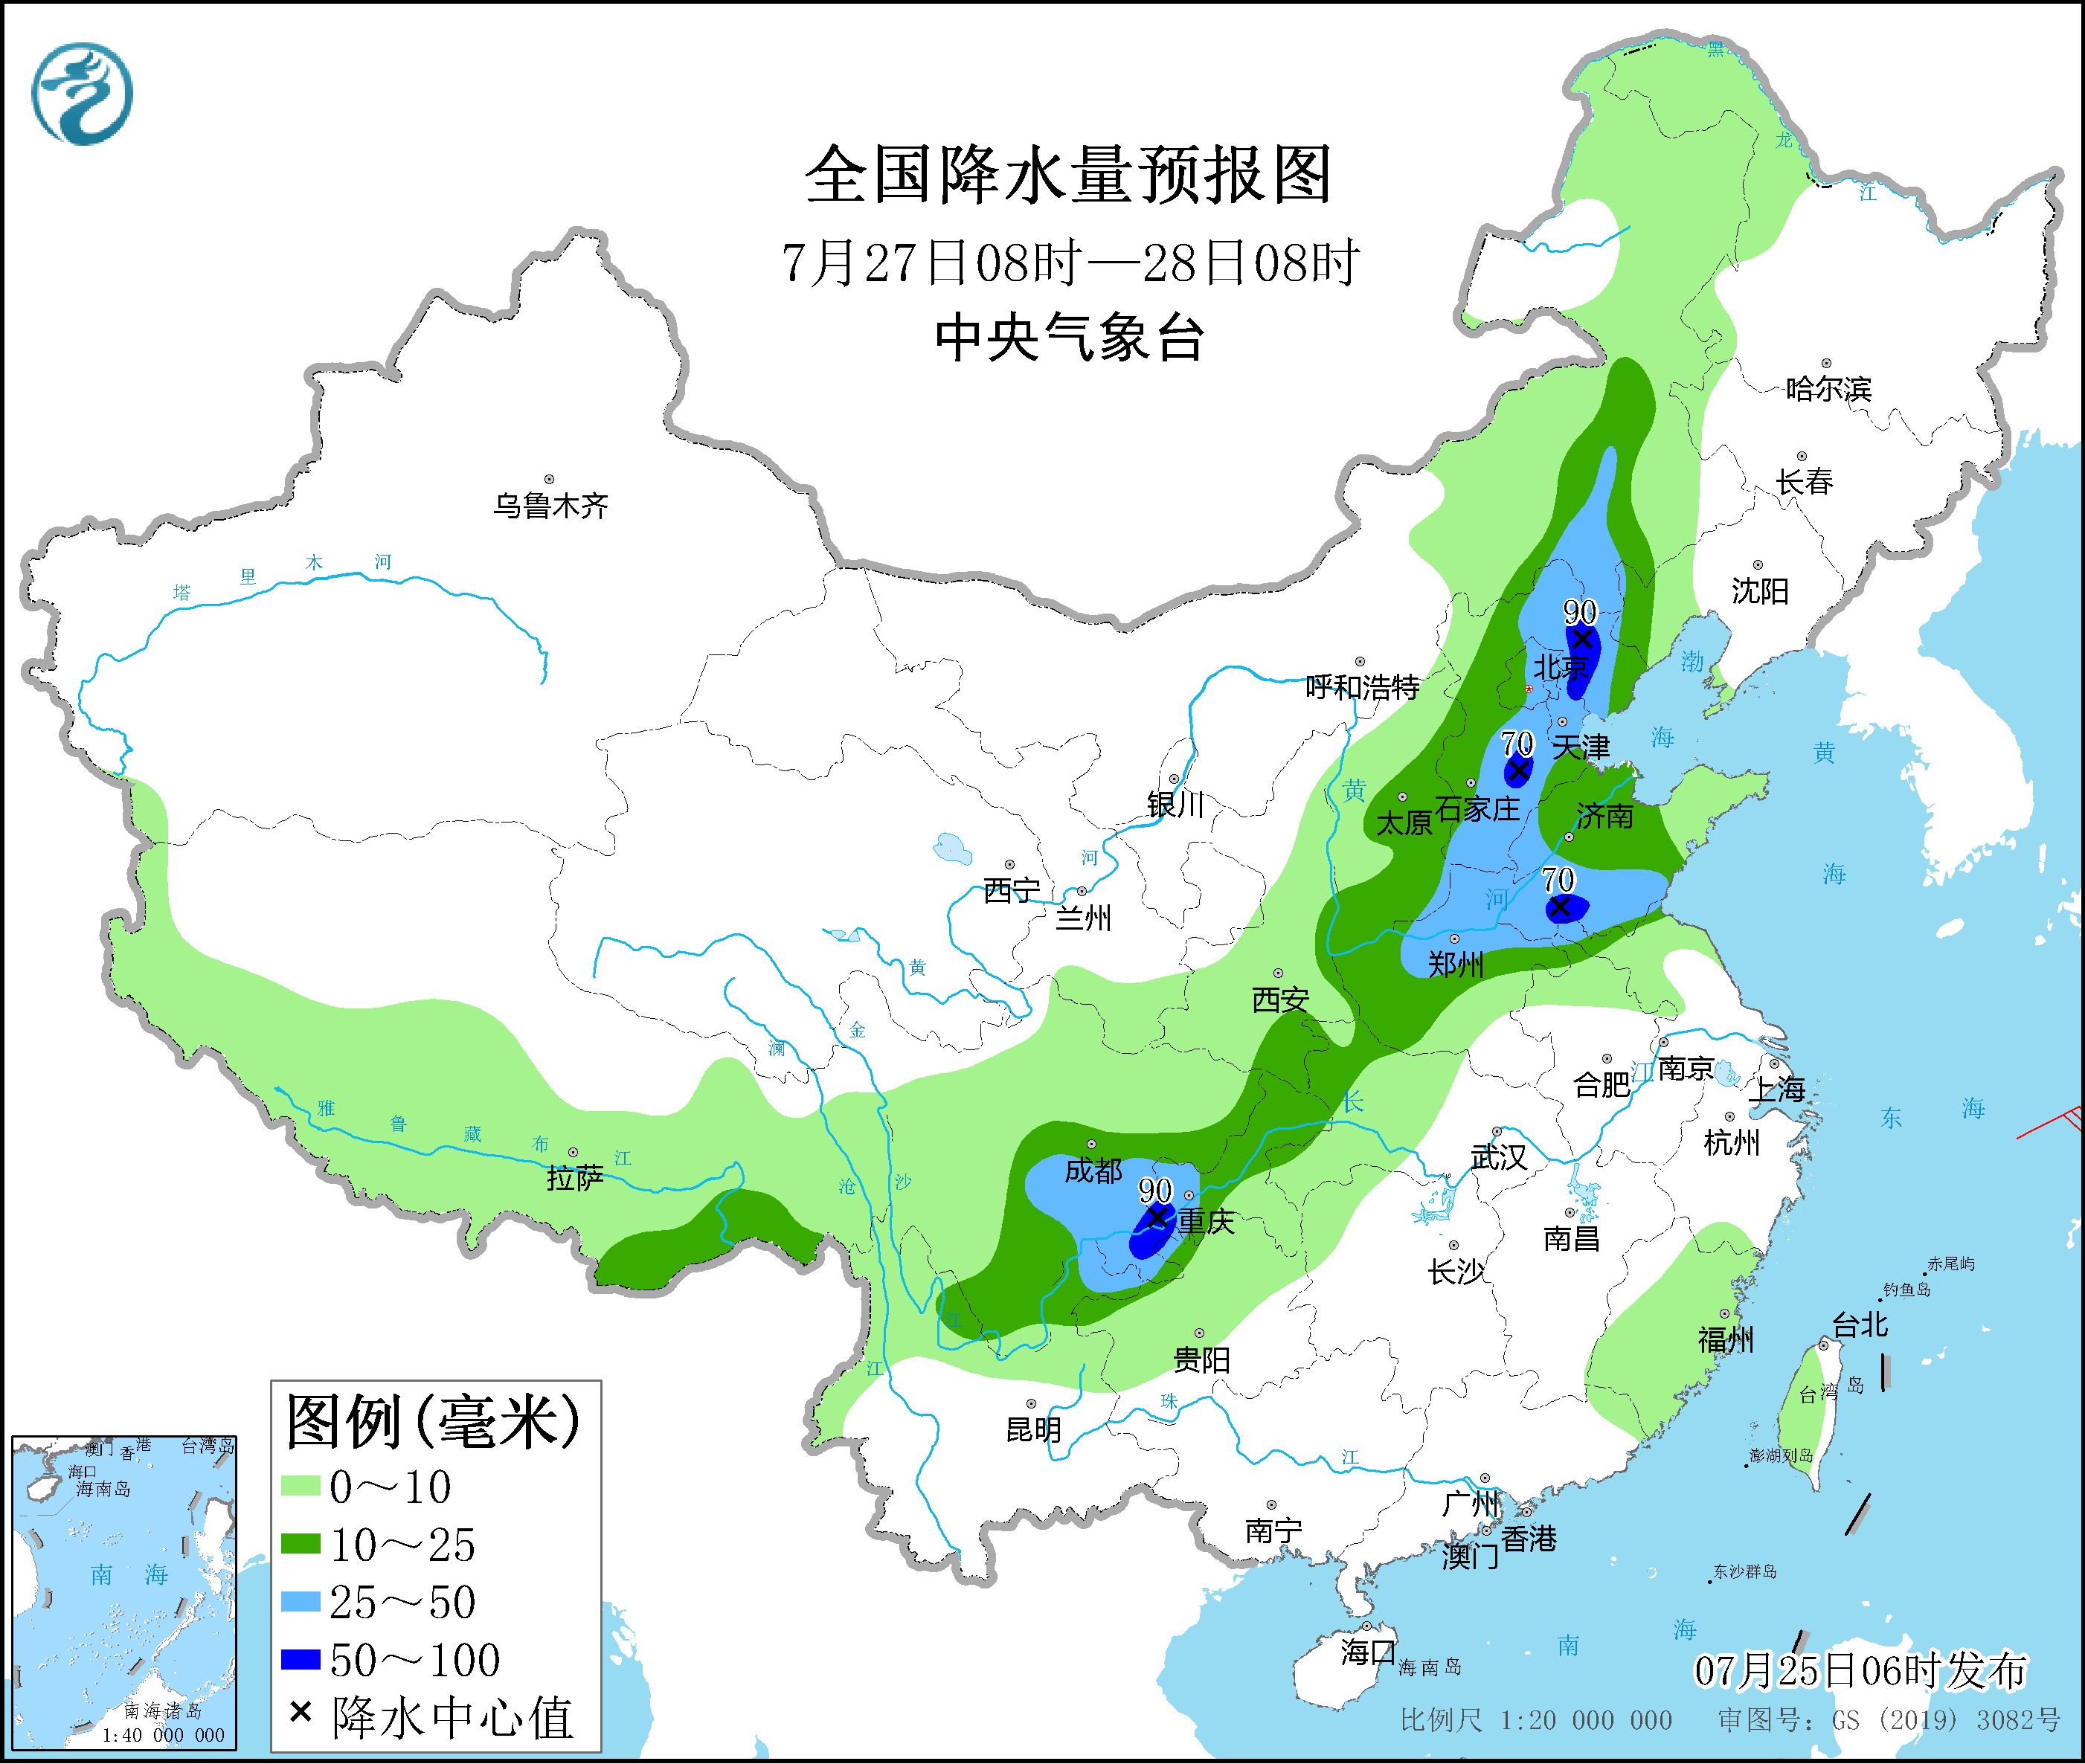 The high temperature weather in Jiangnan, South China and other places continues, and there will be a more obvious rainfall process in the northern region